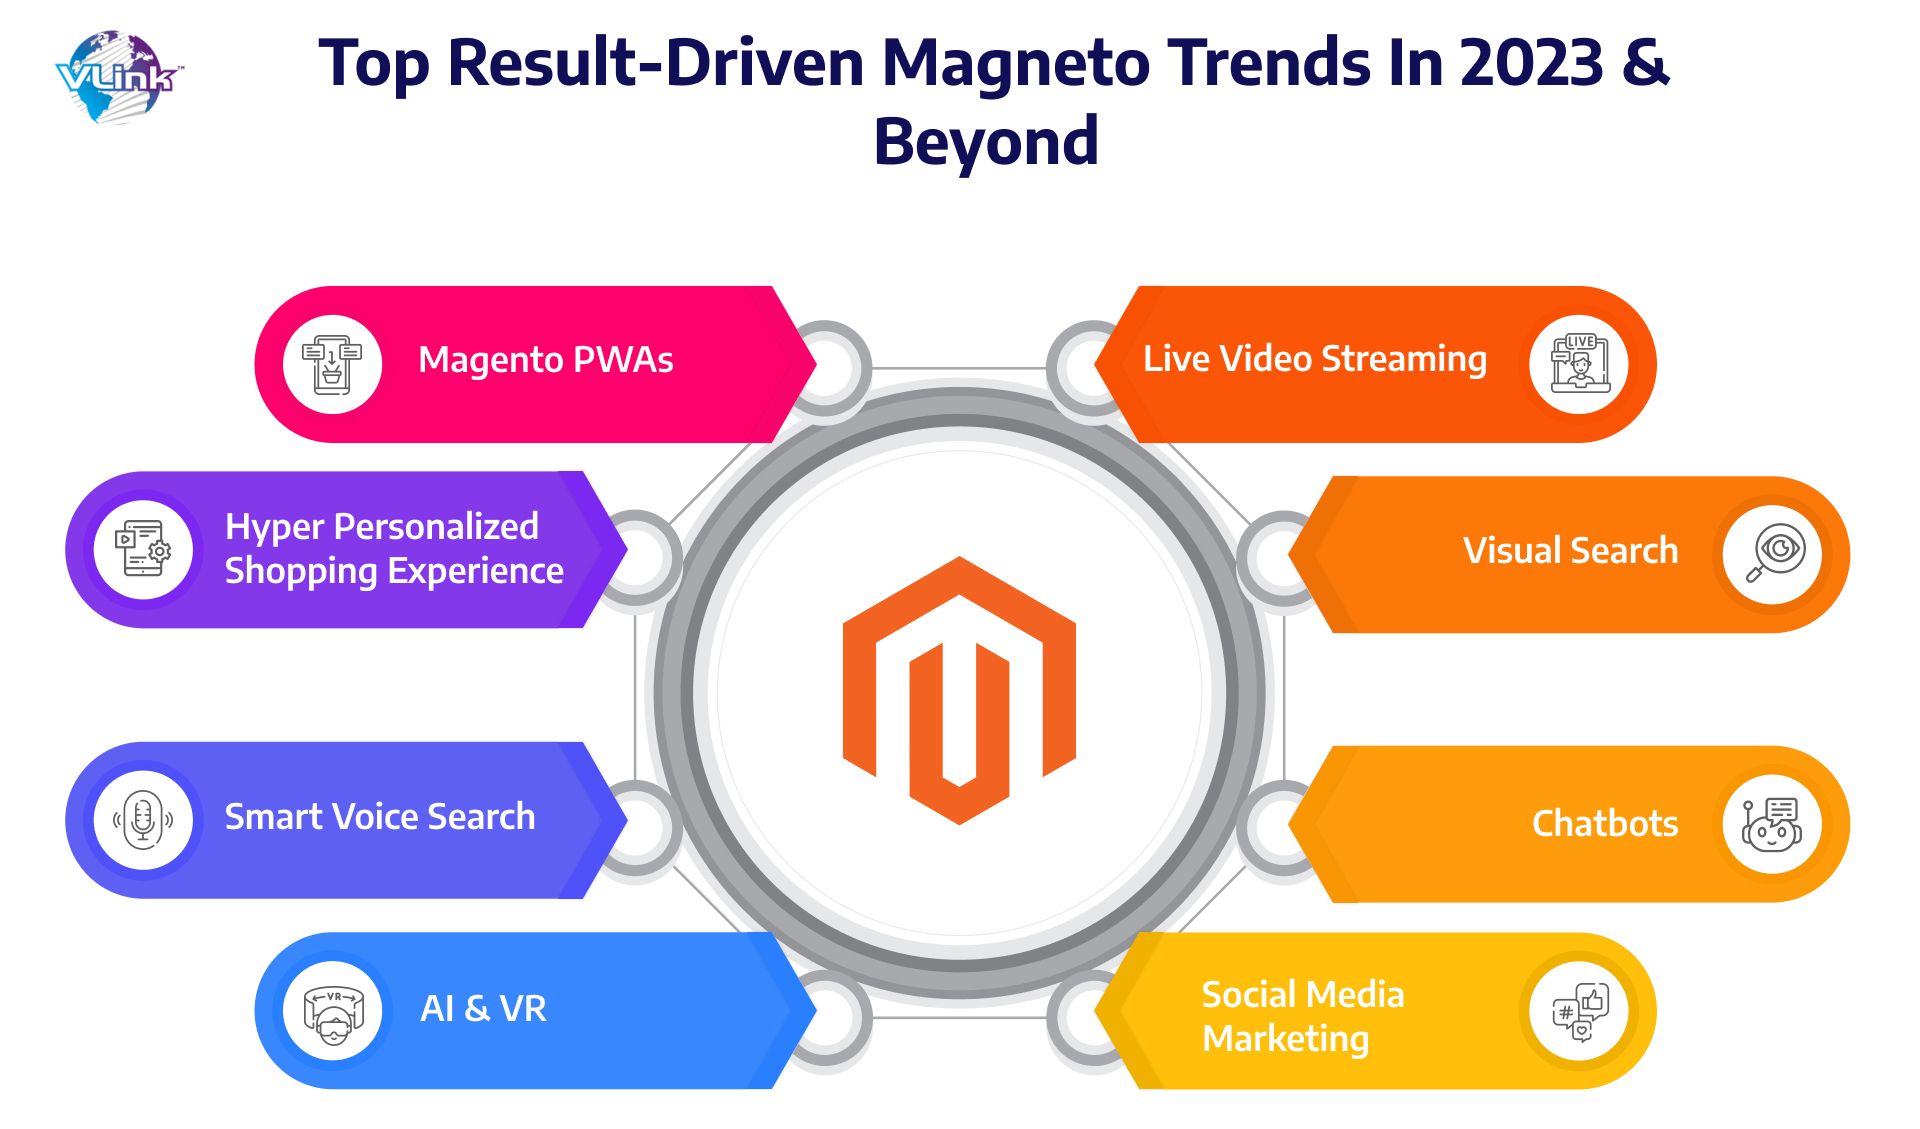 Top Result-Driven Magento Trends in 2023 & Beyond